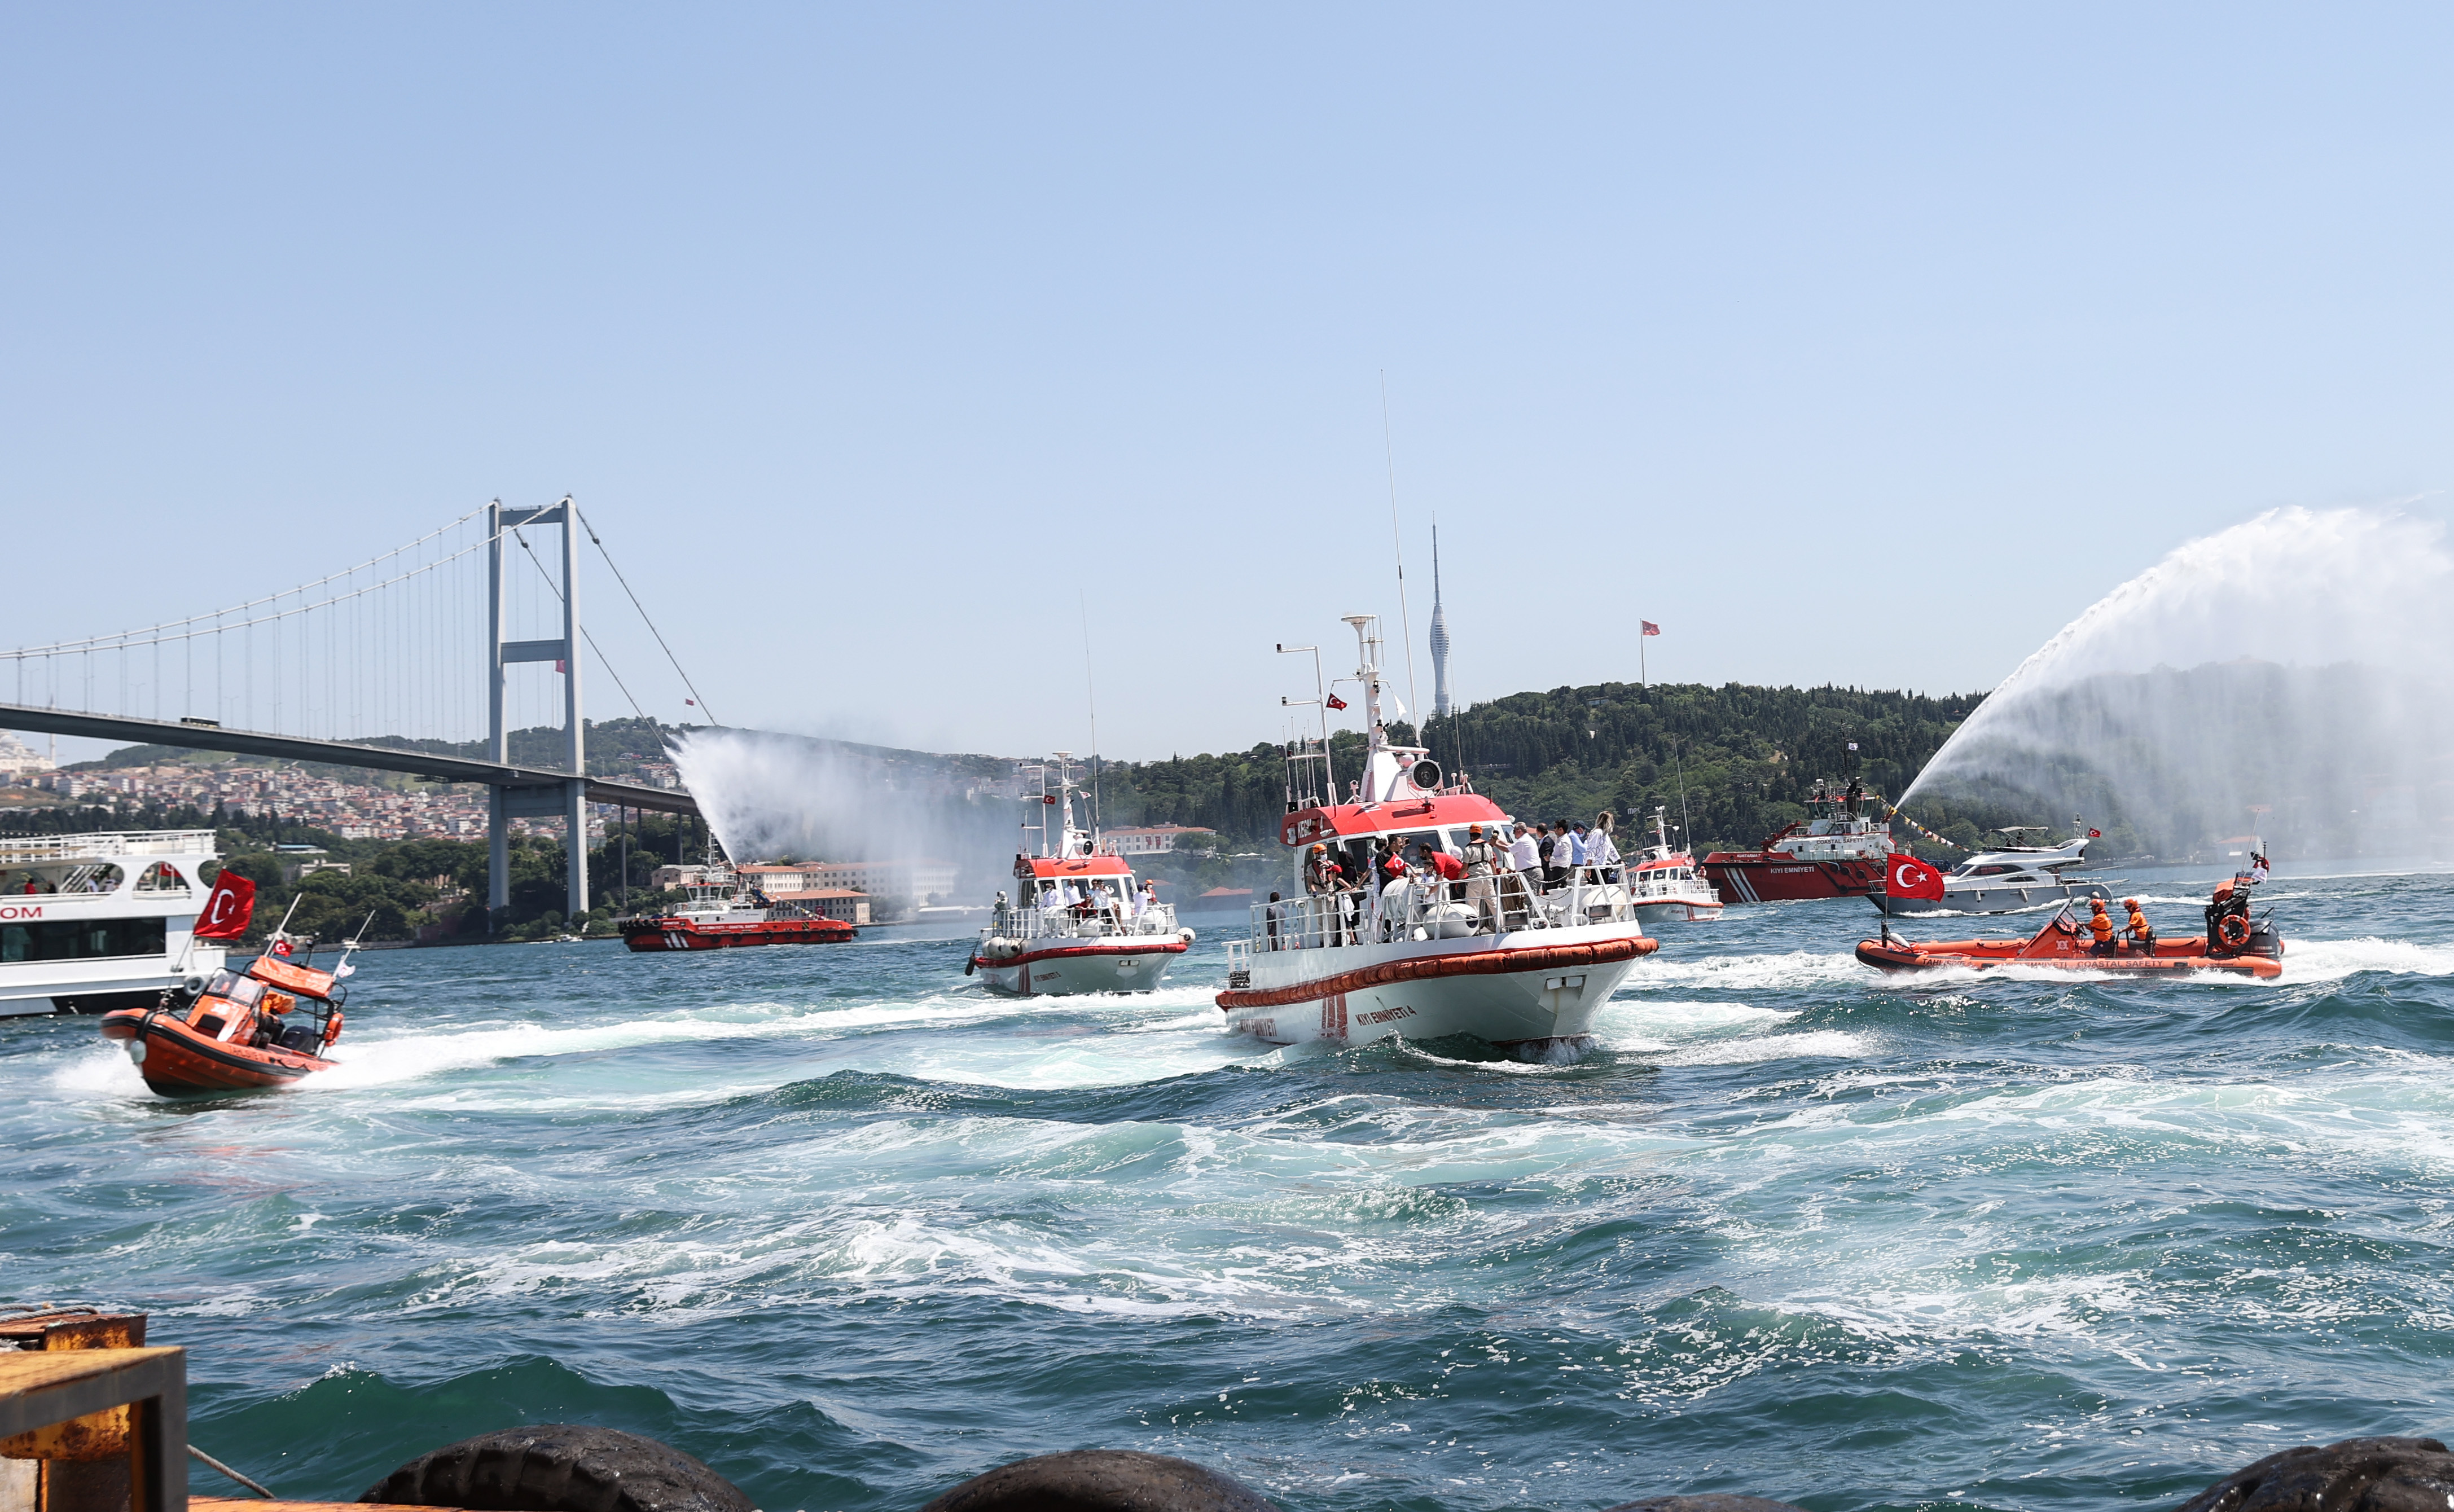 Boats put on show marking July 15 Democracy and National Unity Day in Istanbul